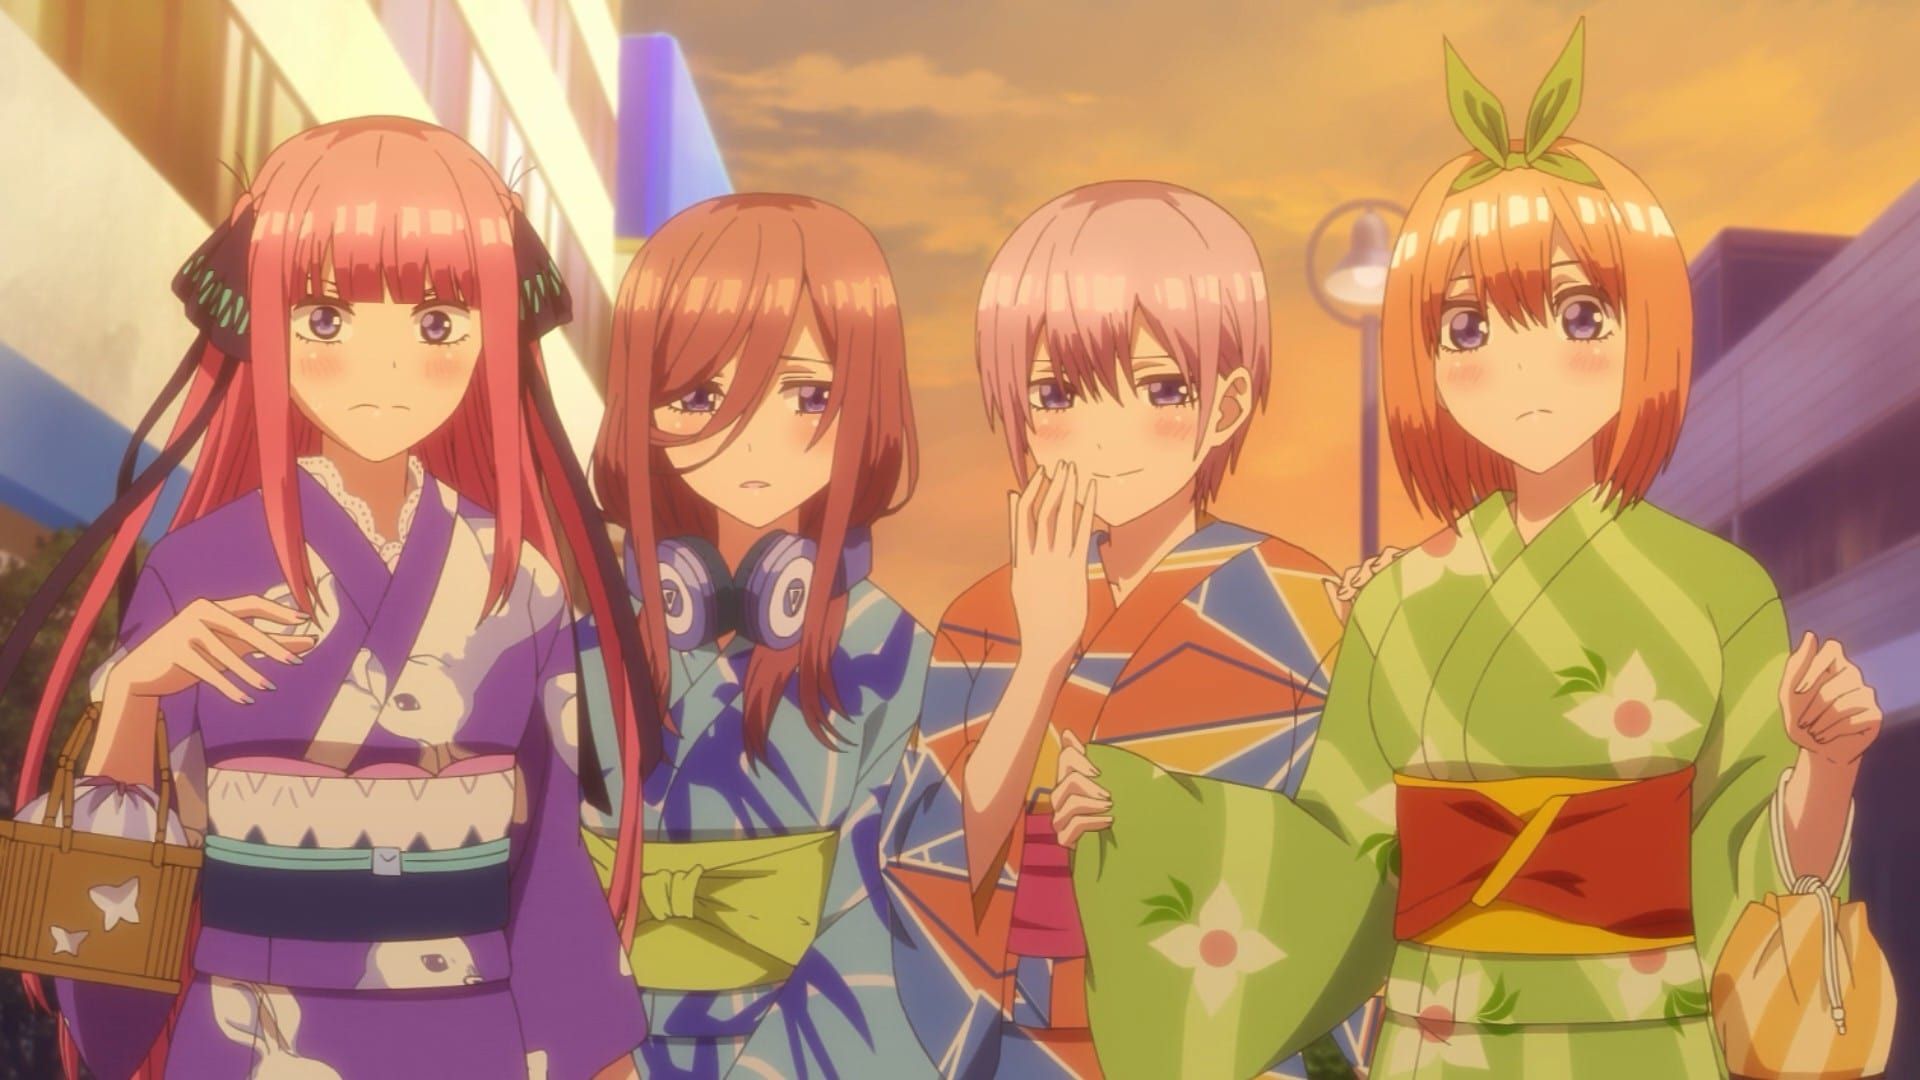 The Quintessential Quintuplets background